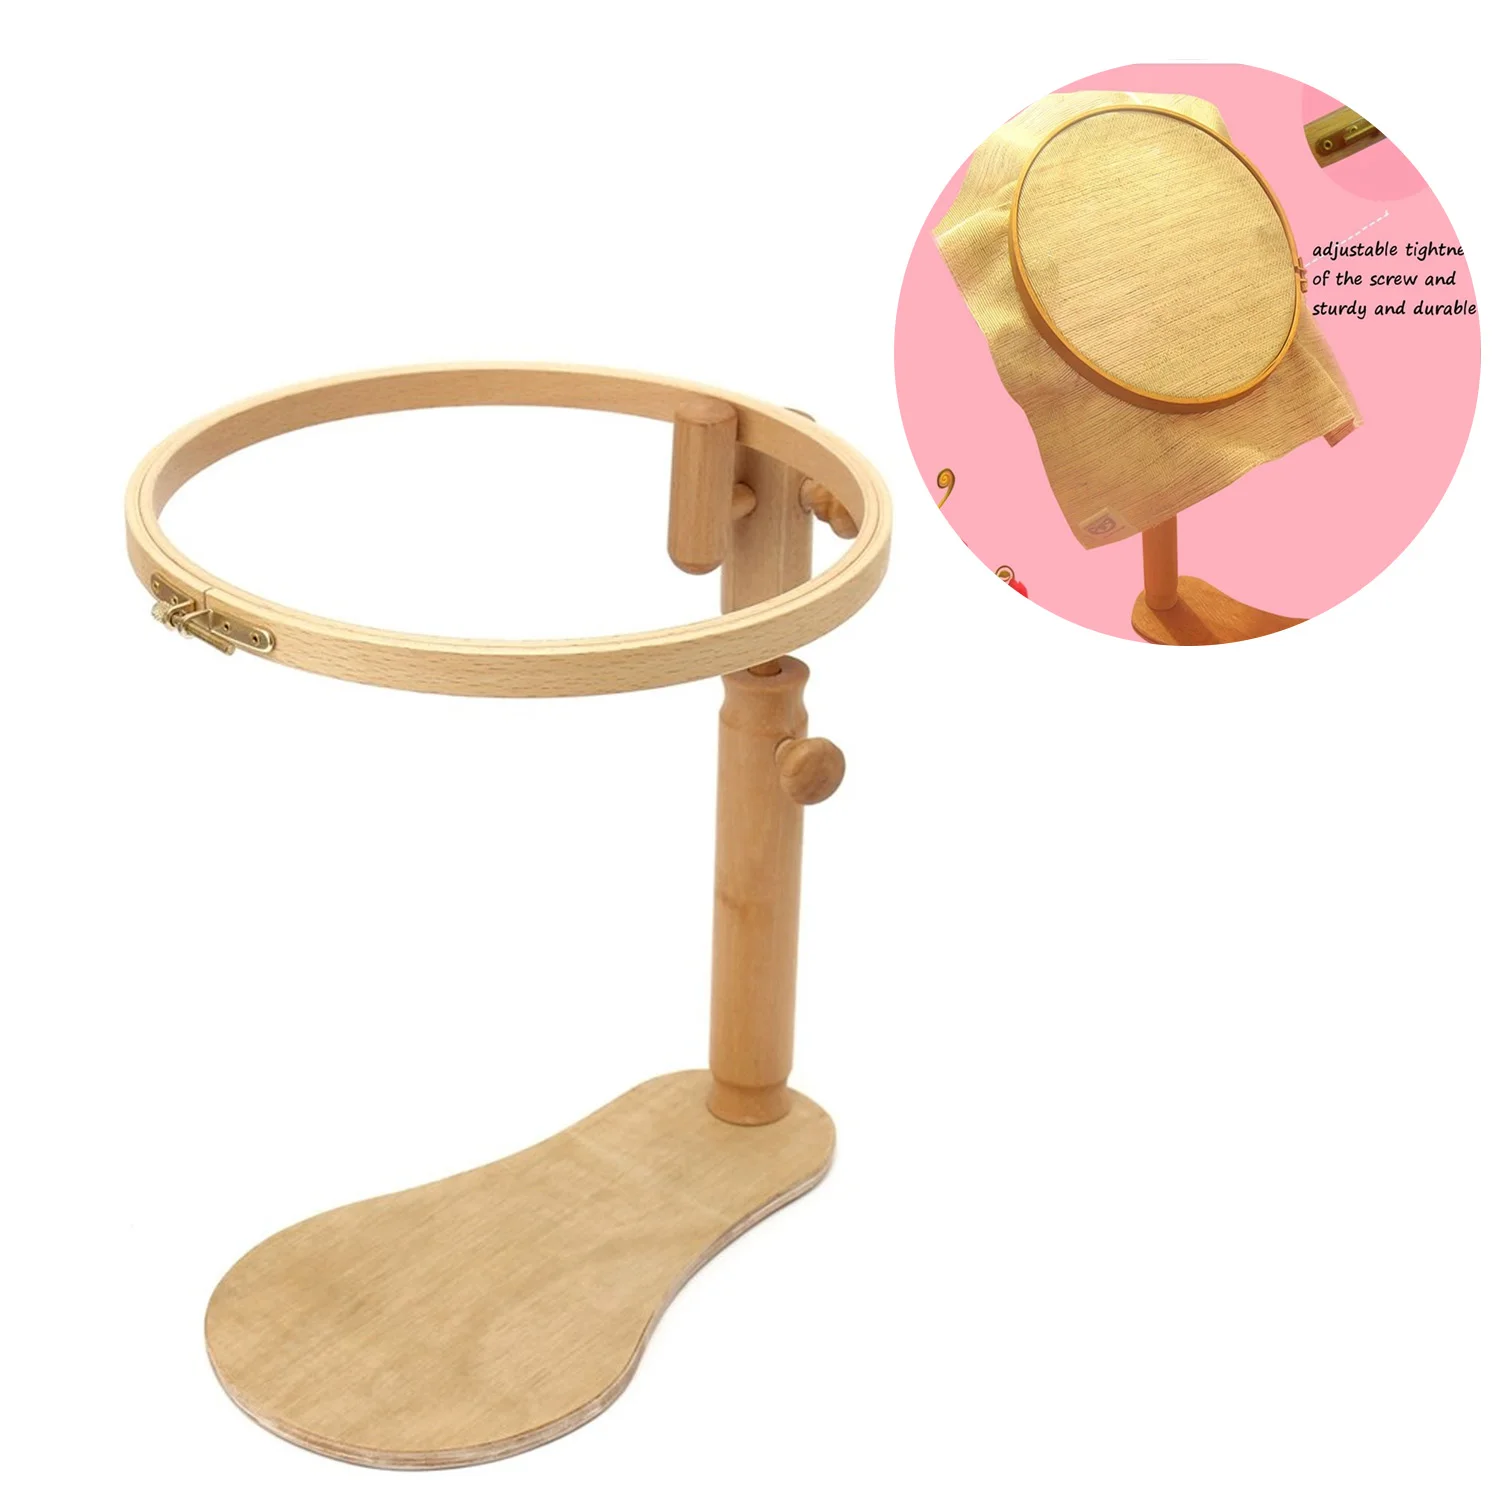 

Portable Adjustable Round Wooden Cross Stitch Embroidery Hoop Ring Rack Frame Desktop Stand Handmade Craft Sewing Tools 21cm